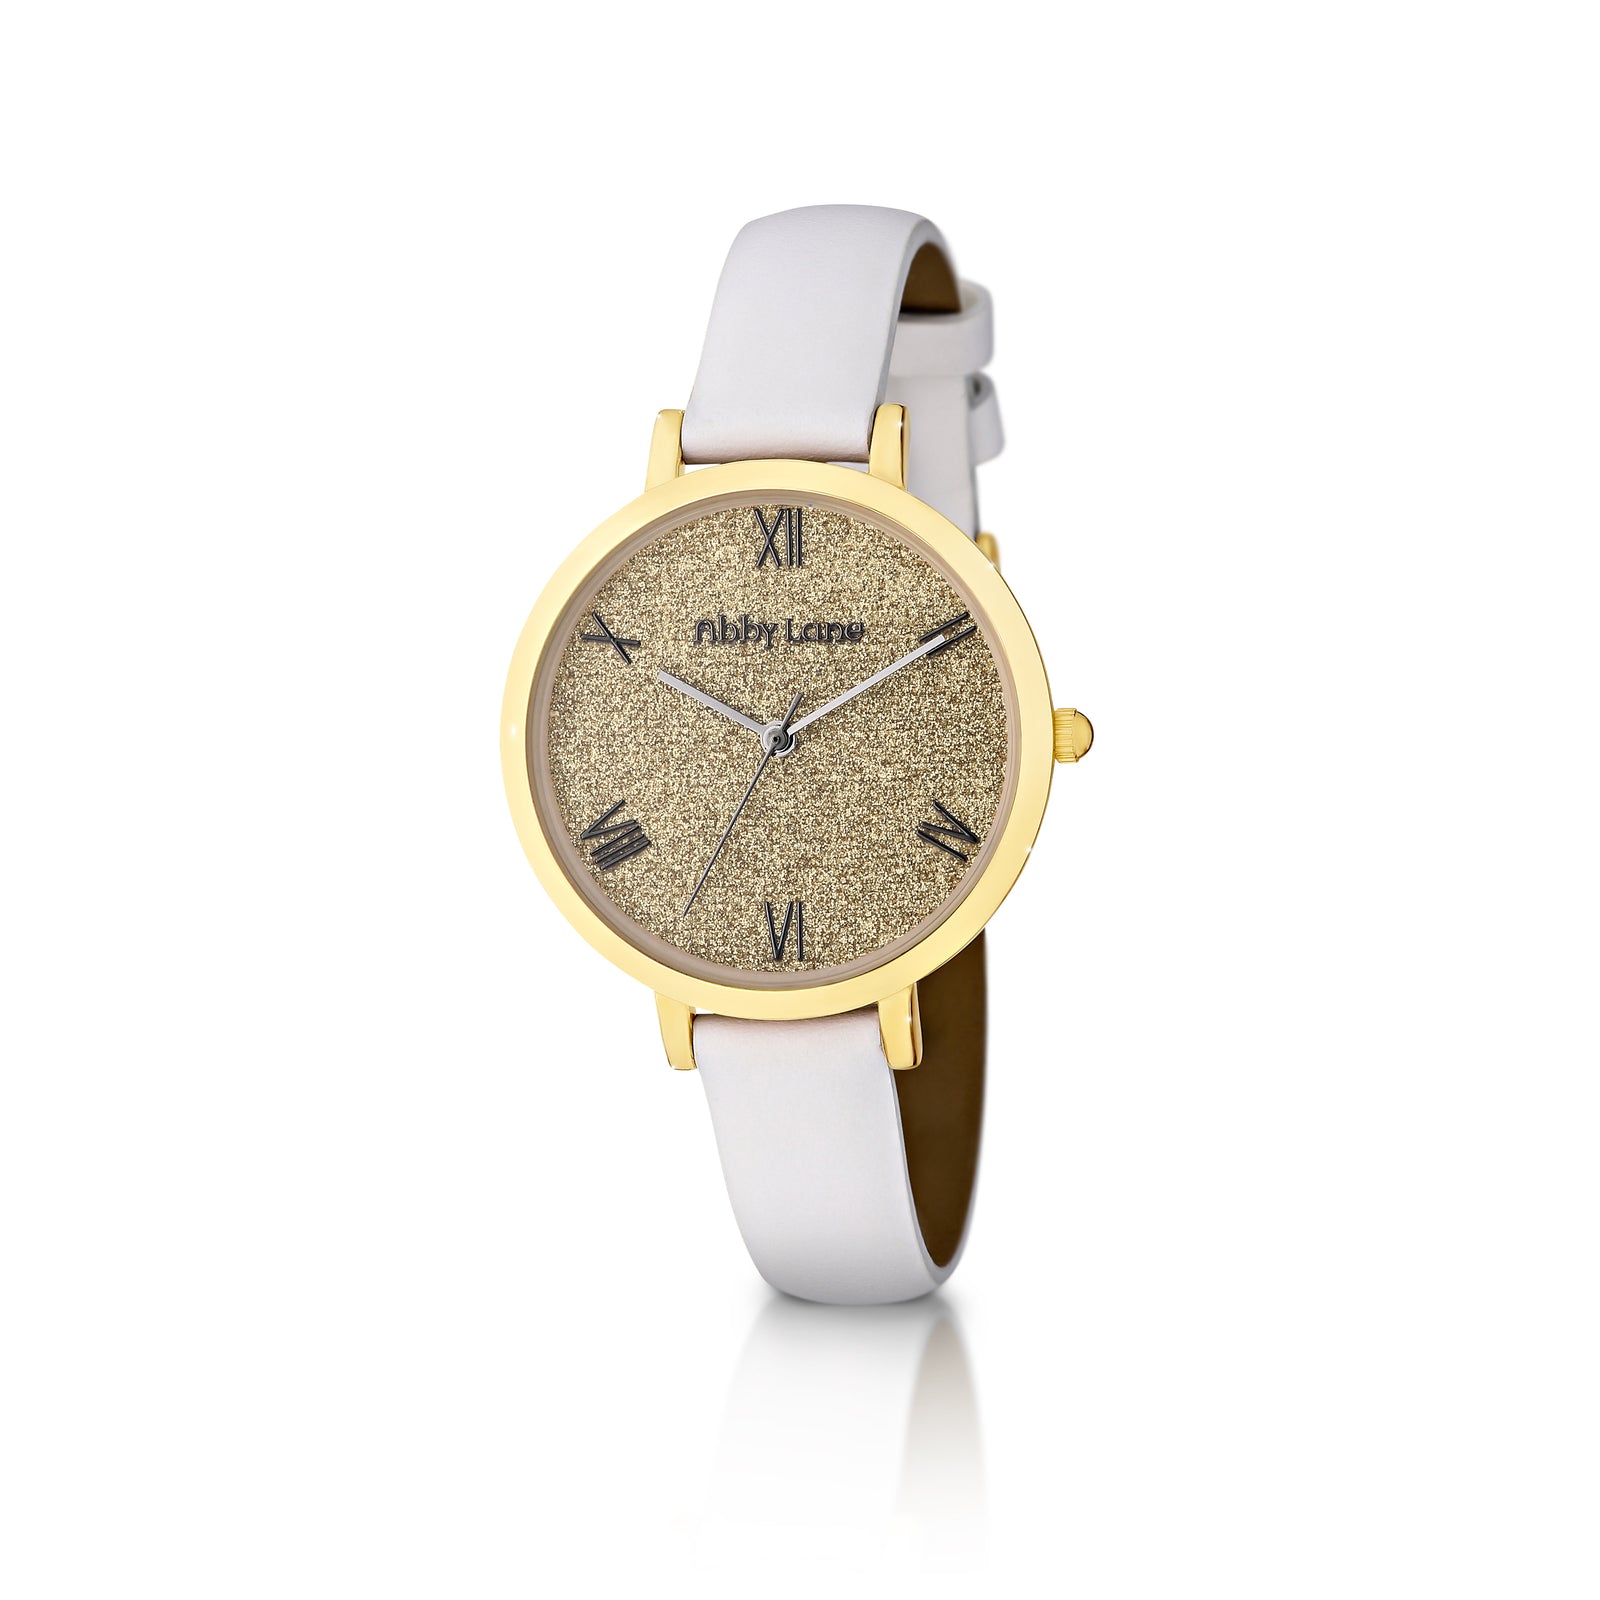 fAbby Lane 'Katherine' Collection Ladies Watch Goldtone Case with Gold Glitter Dial